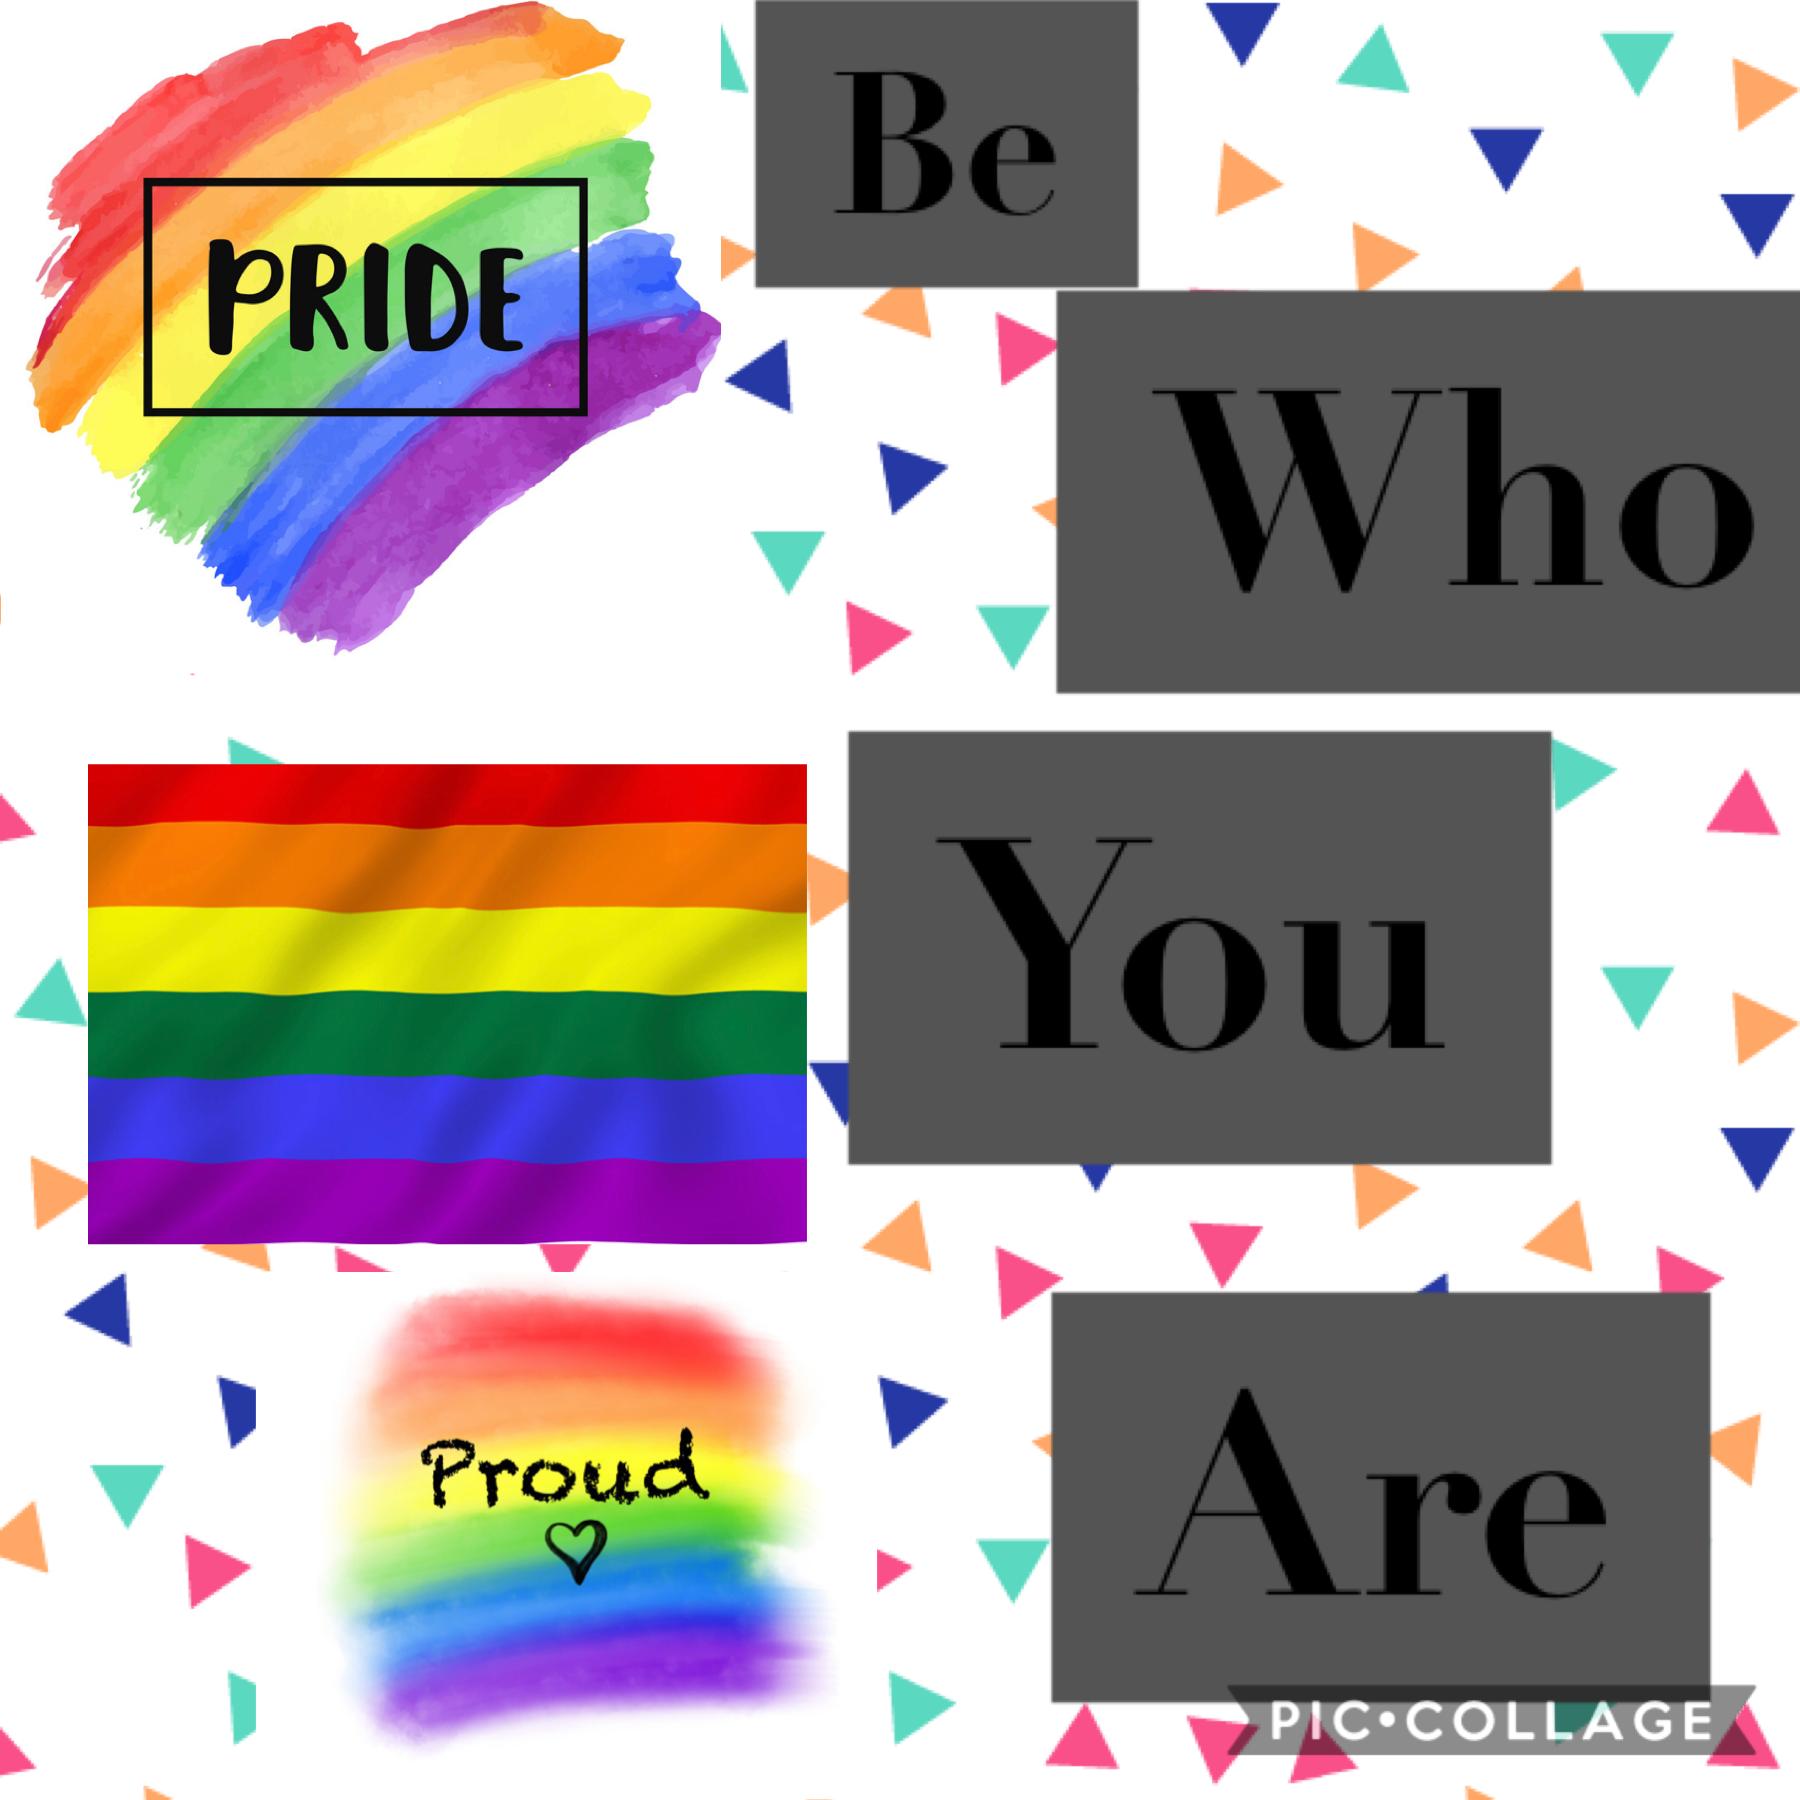 Be proud of you are and love who ever you want to